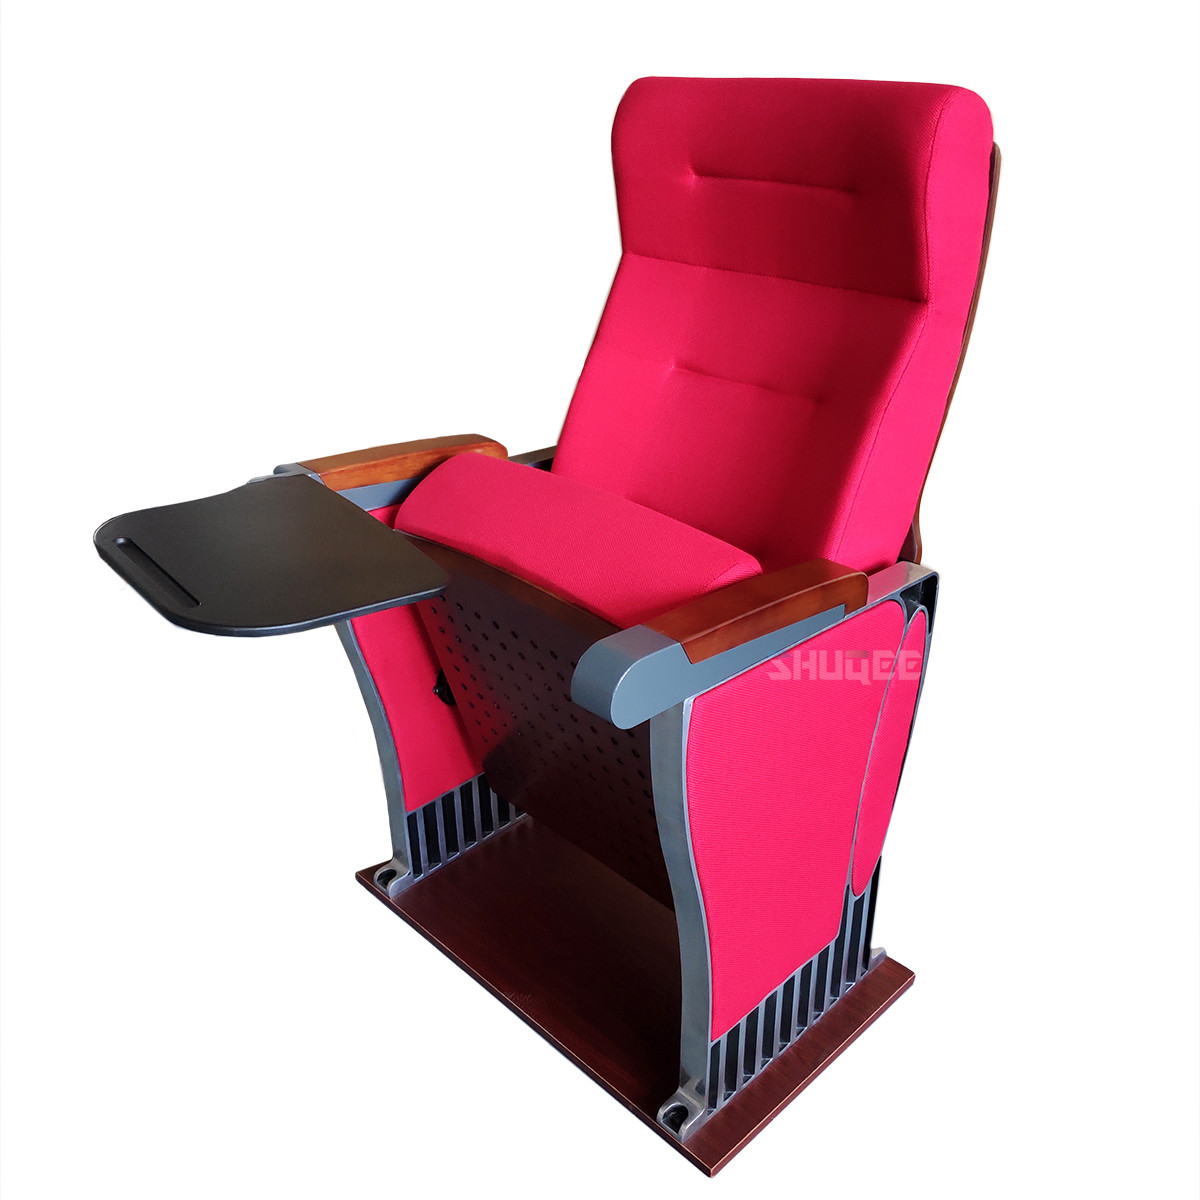  Foldable Audience Seating PU Molded Foam Anti Stained Auditorium Chairs With Writing Board Manufactures